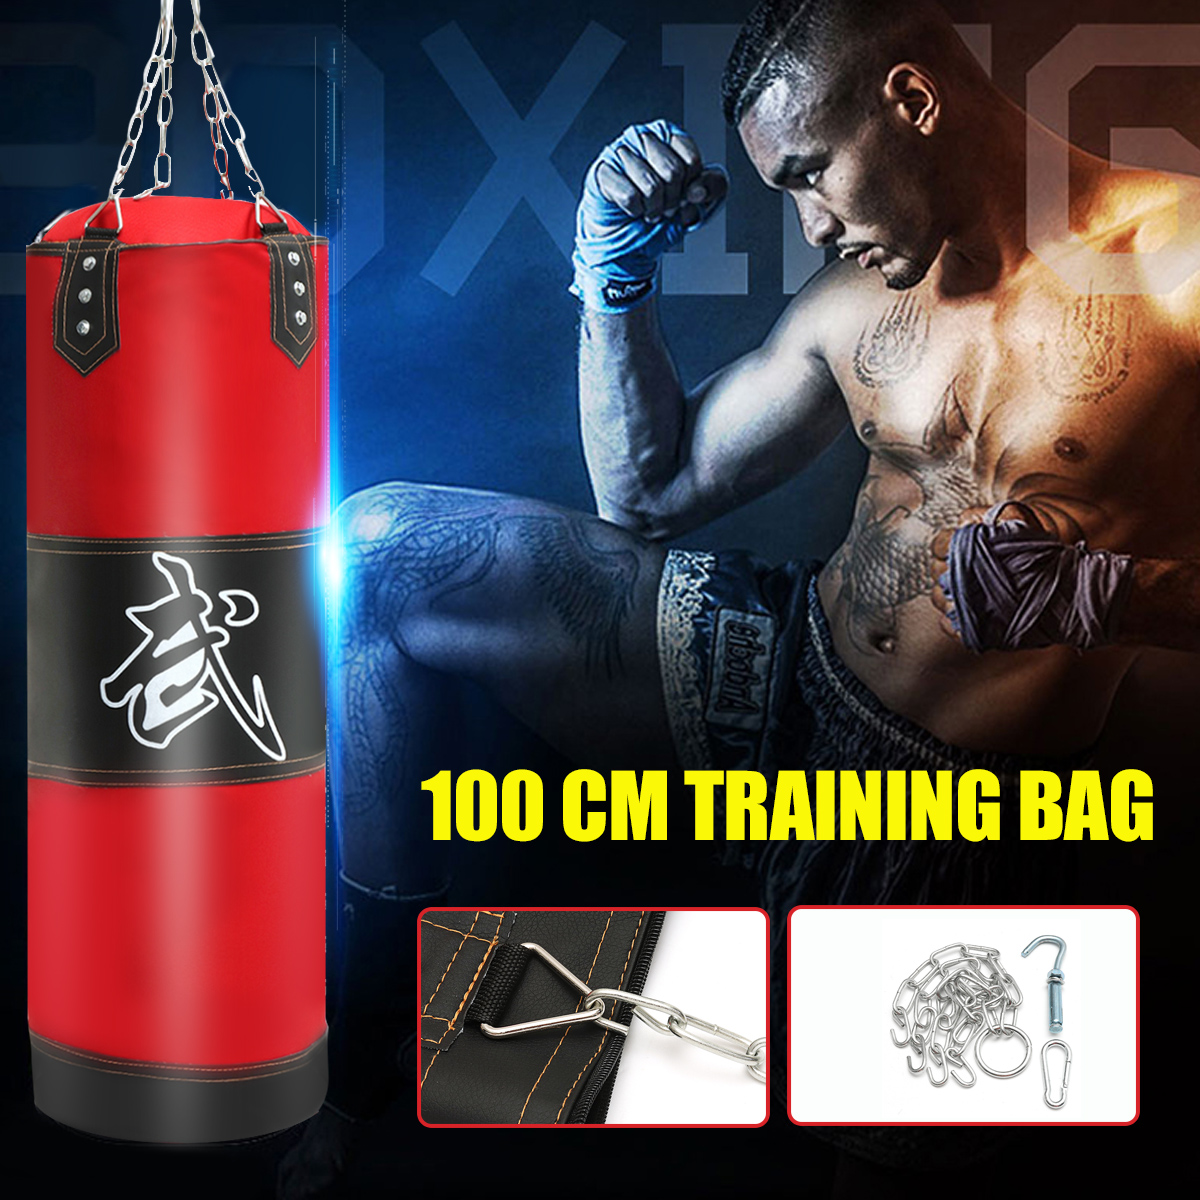 100cm Punching Bag with Chains Muay Thai Punching Sparring Kickboxing Training 